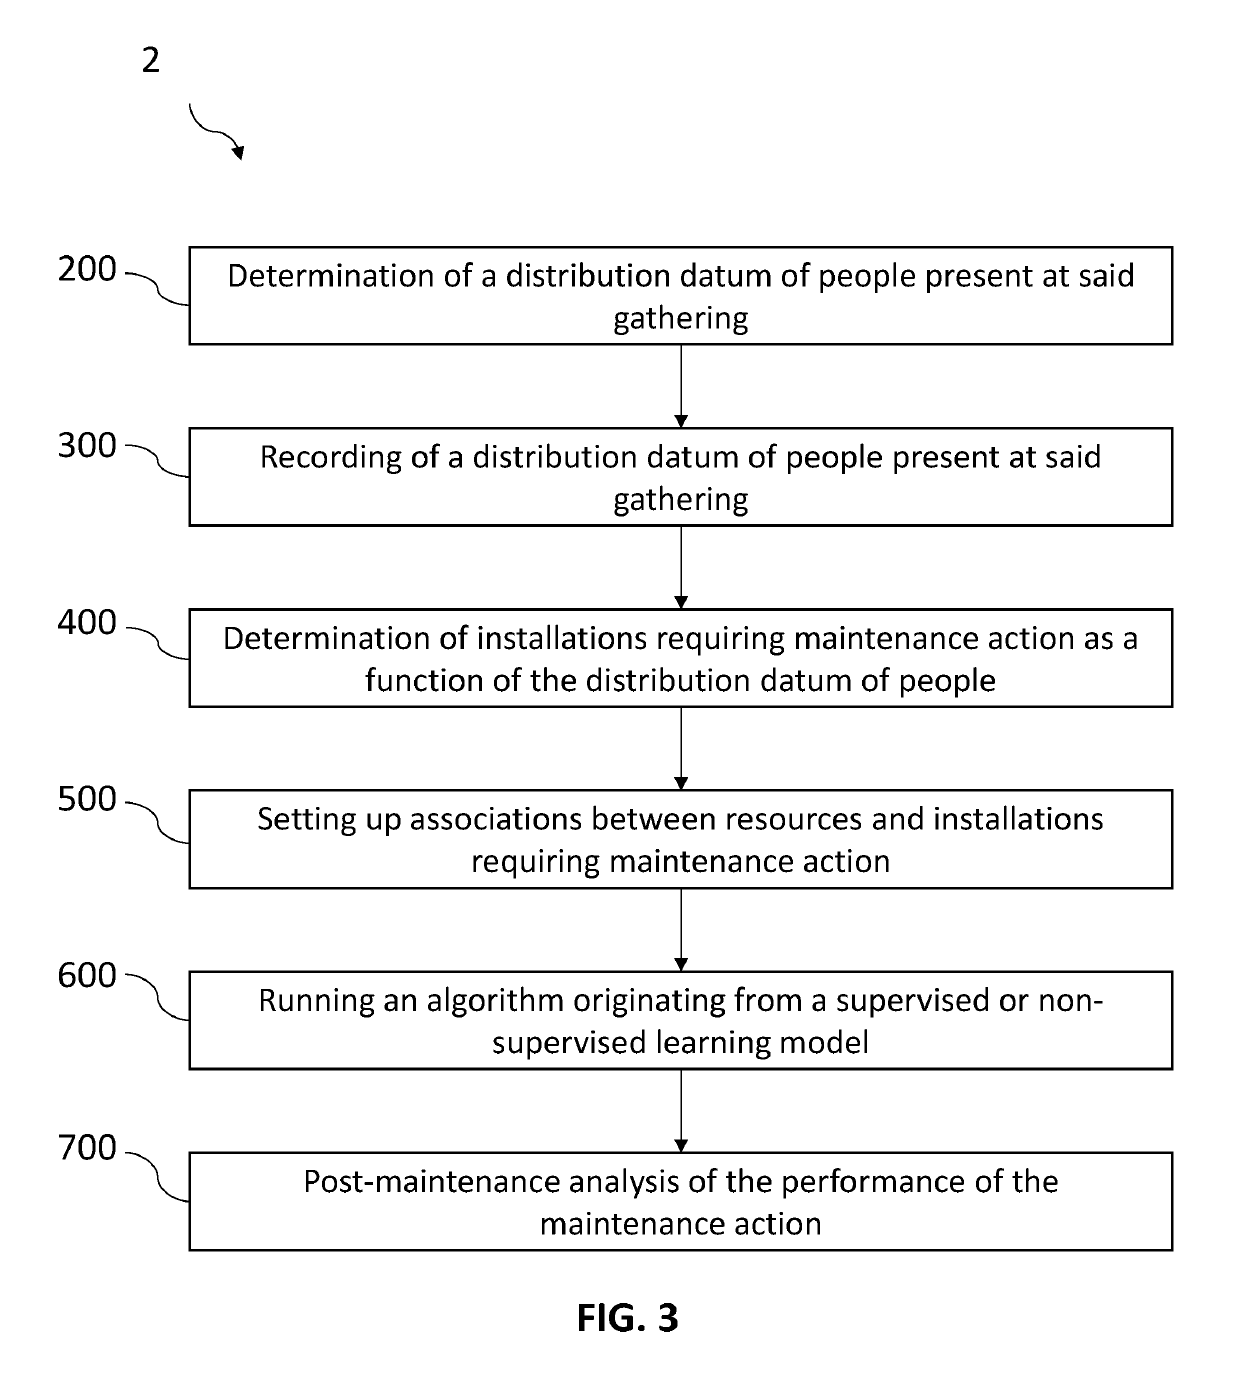 System and process for maintenance management during a mass gathering